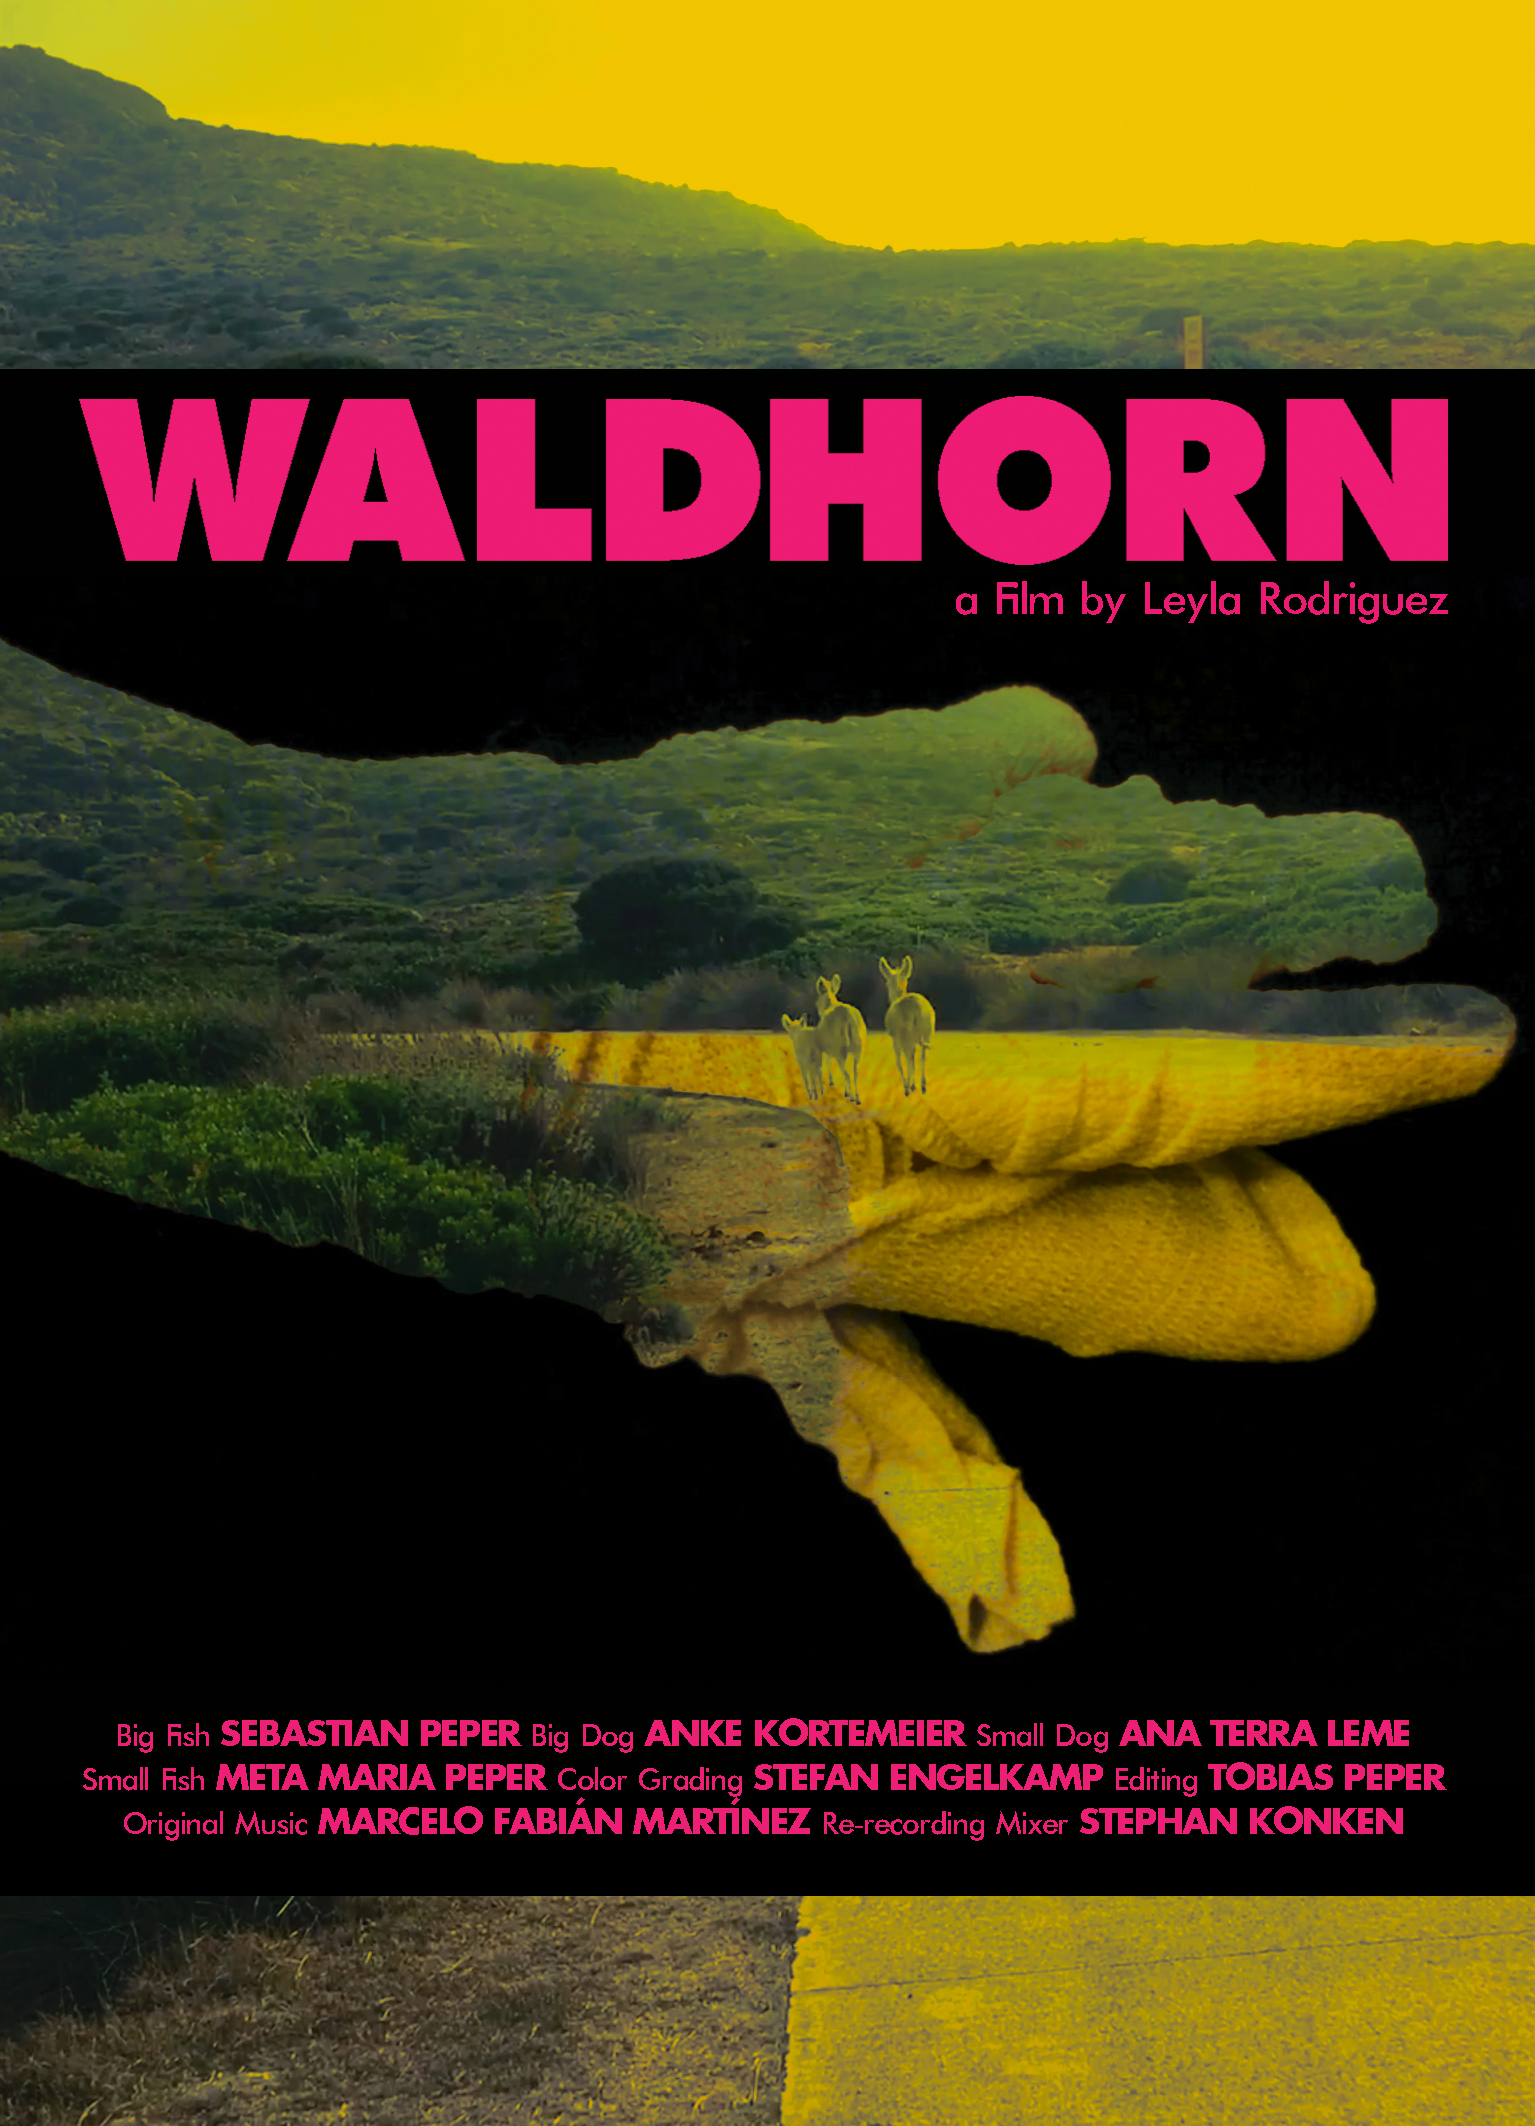 “WALDHORN” by Leyla Rodriguez will be screened on Thursday 15 at 17:11 at the “Sala della Ragione” in Asolo @ the Asolo Art Film Festival/ ITALY